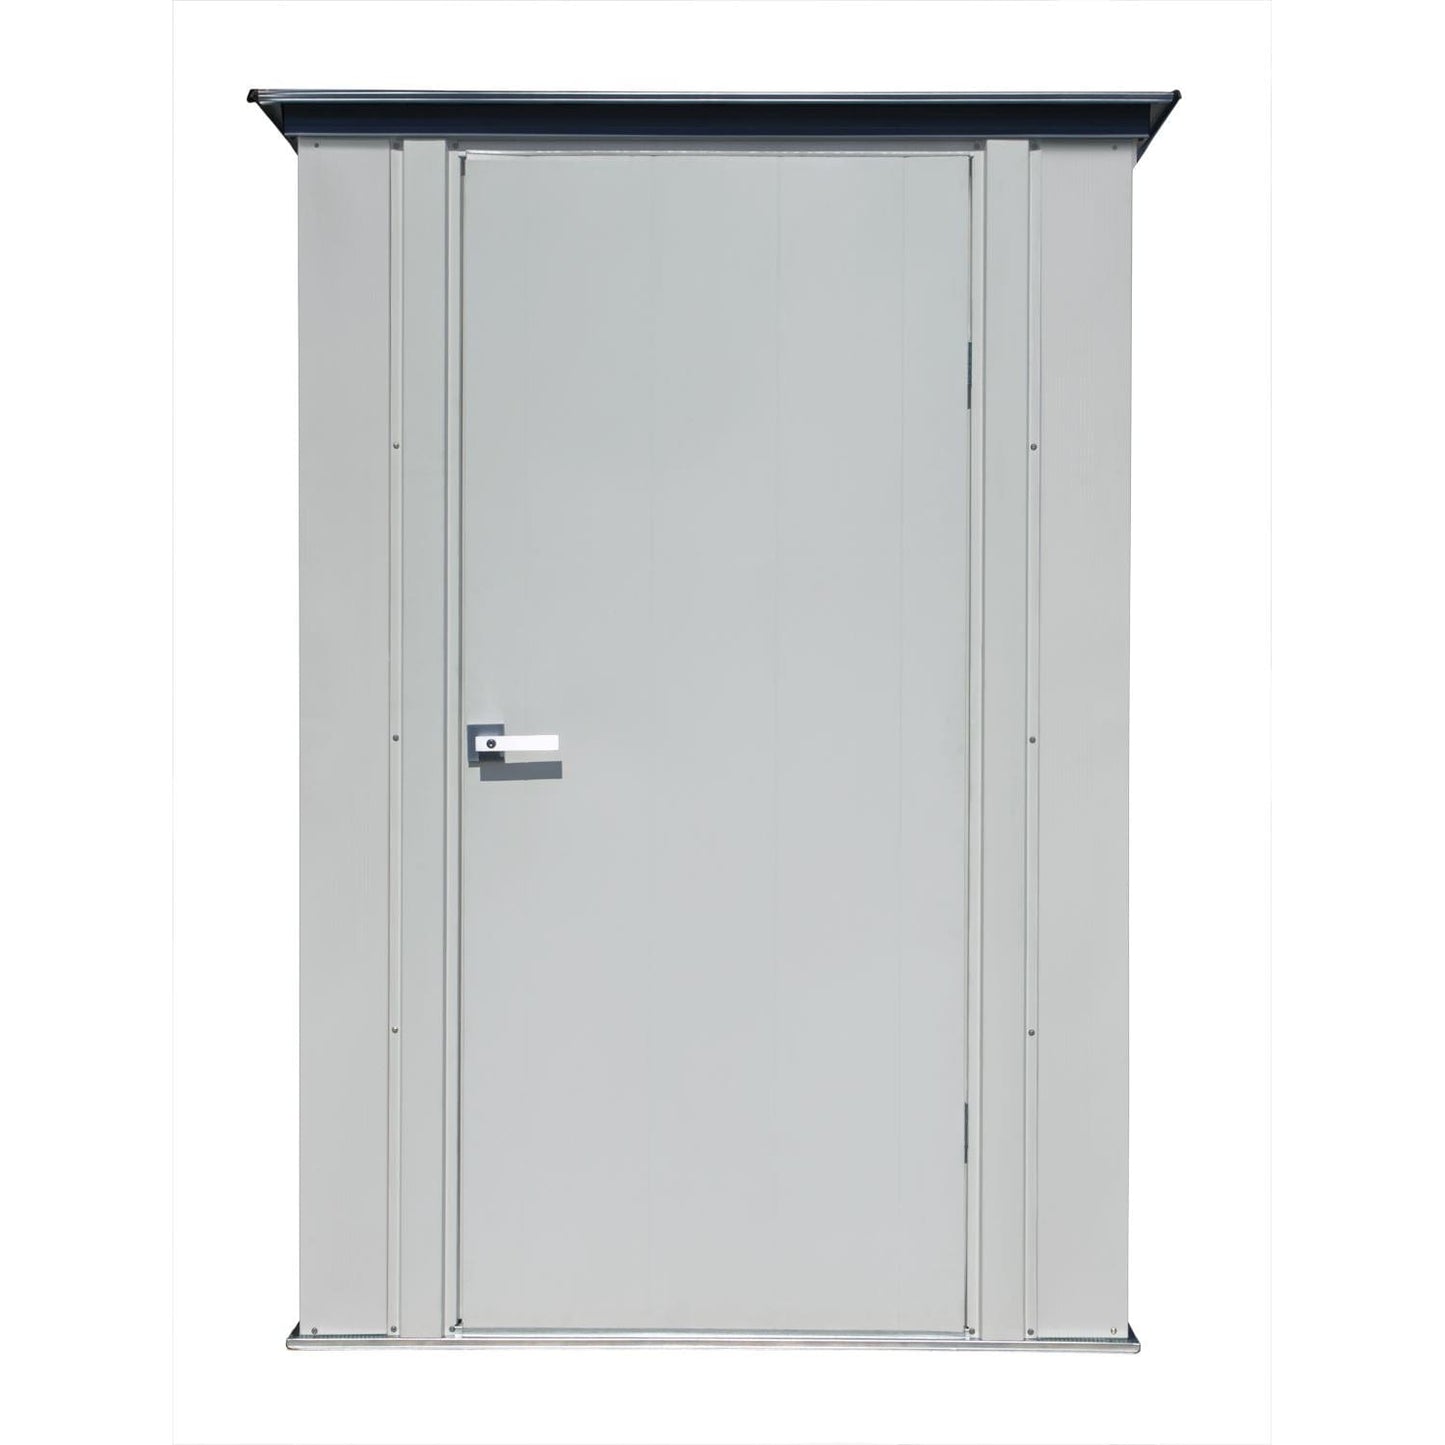 Spacemaker Metal Storage Shed Kit Spacemaker | Patio Shed, 4' x 3' x 6' - Flute Grey and Anthracite PS43